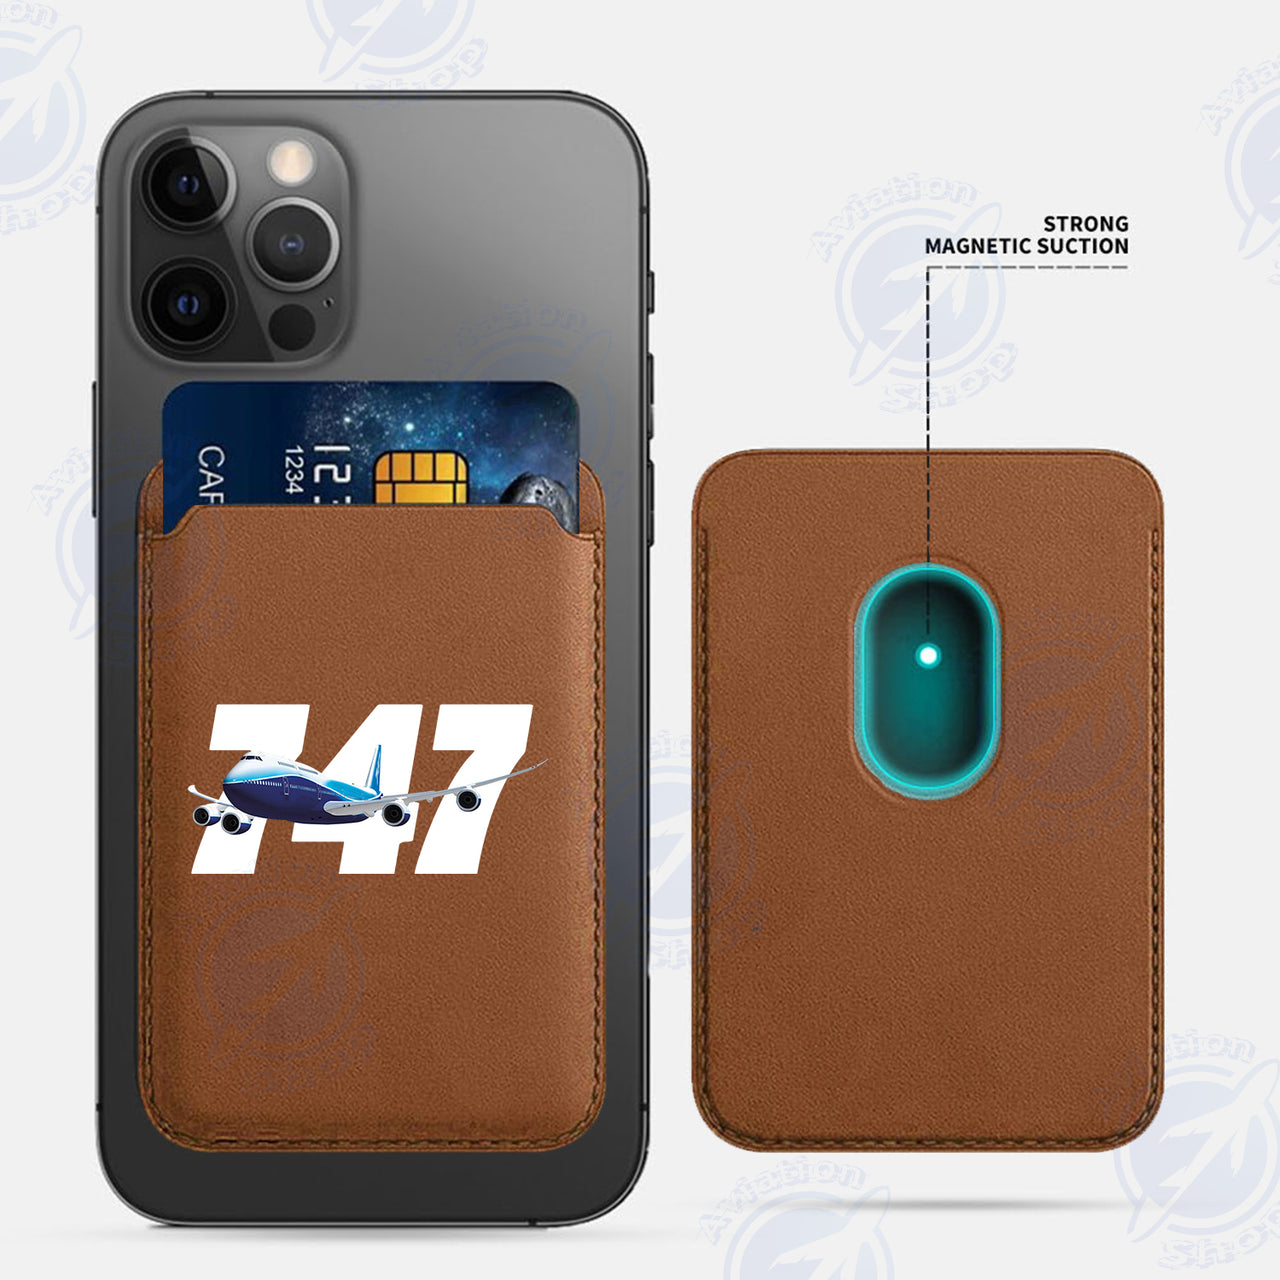 Super Boeing 747 iPhone Cases Magnetic Card Wallet